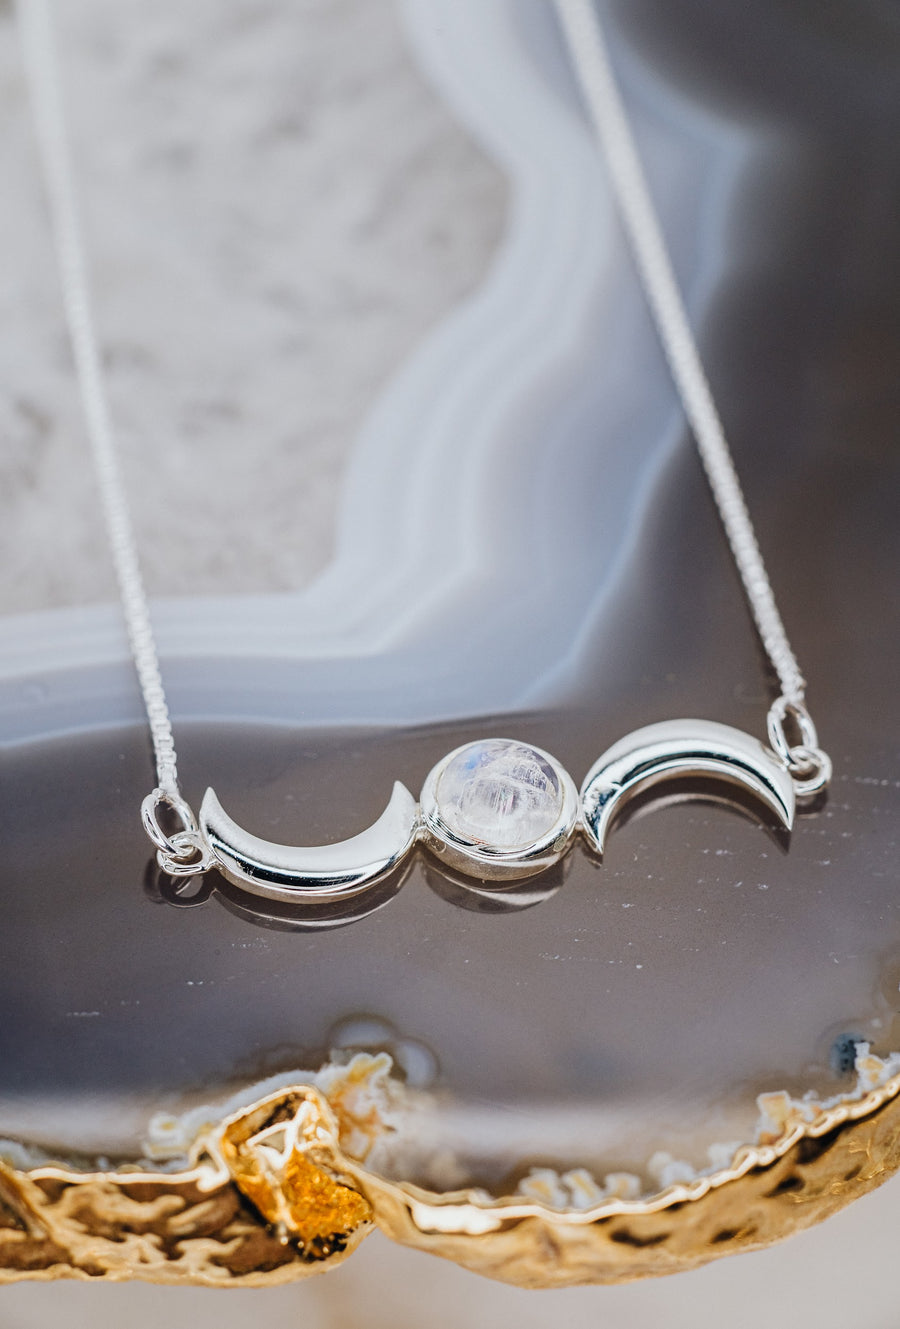 Moonstone double moon necklace